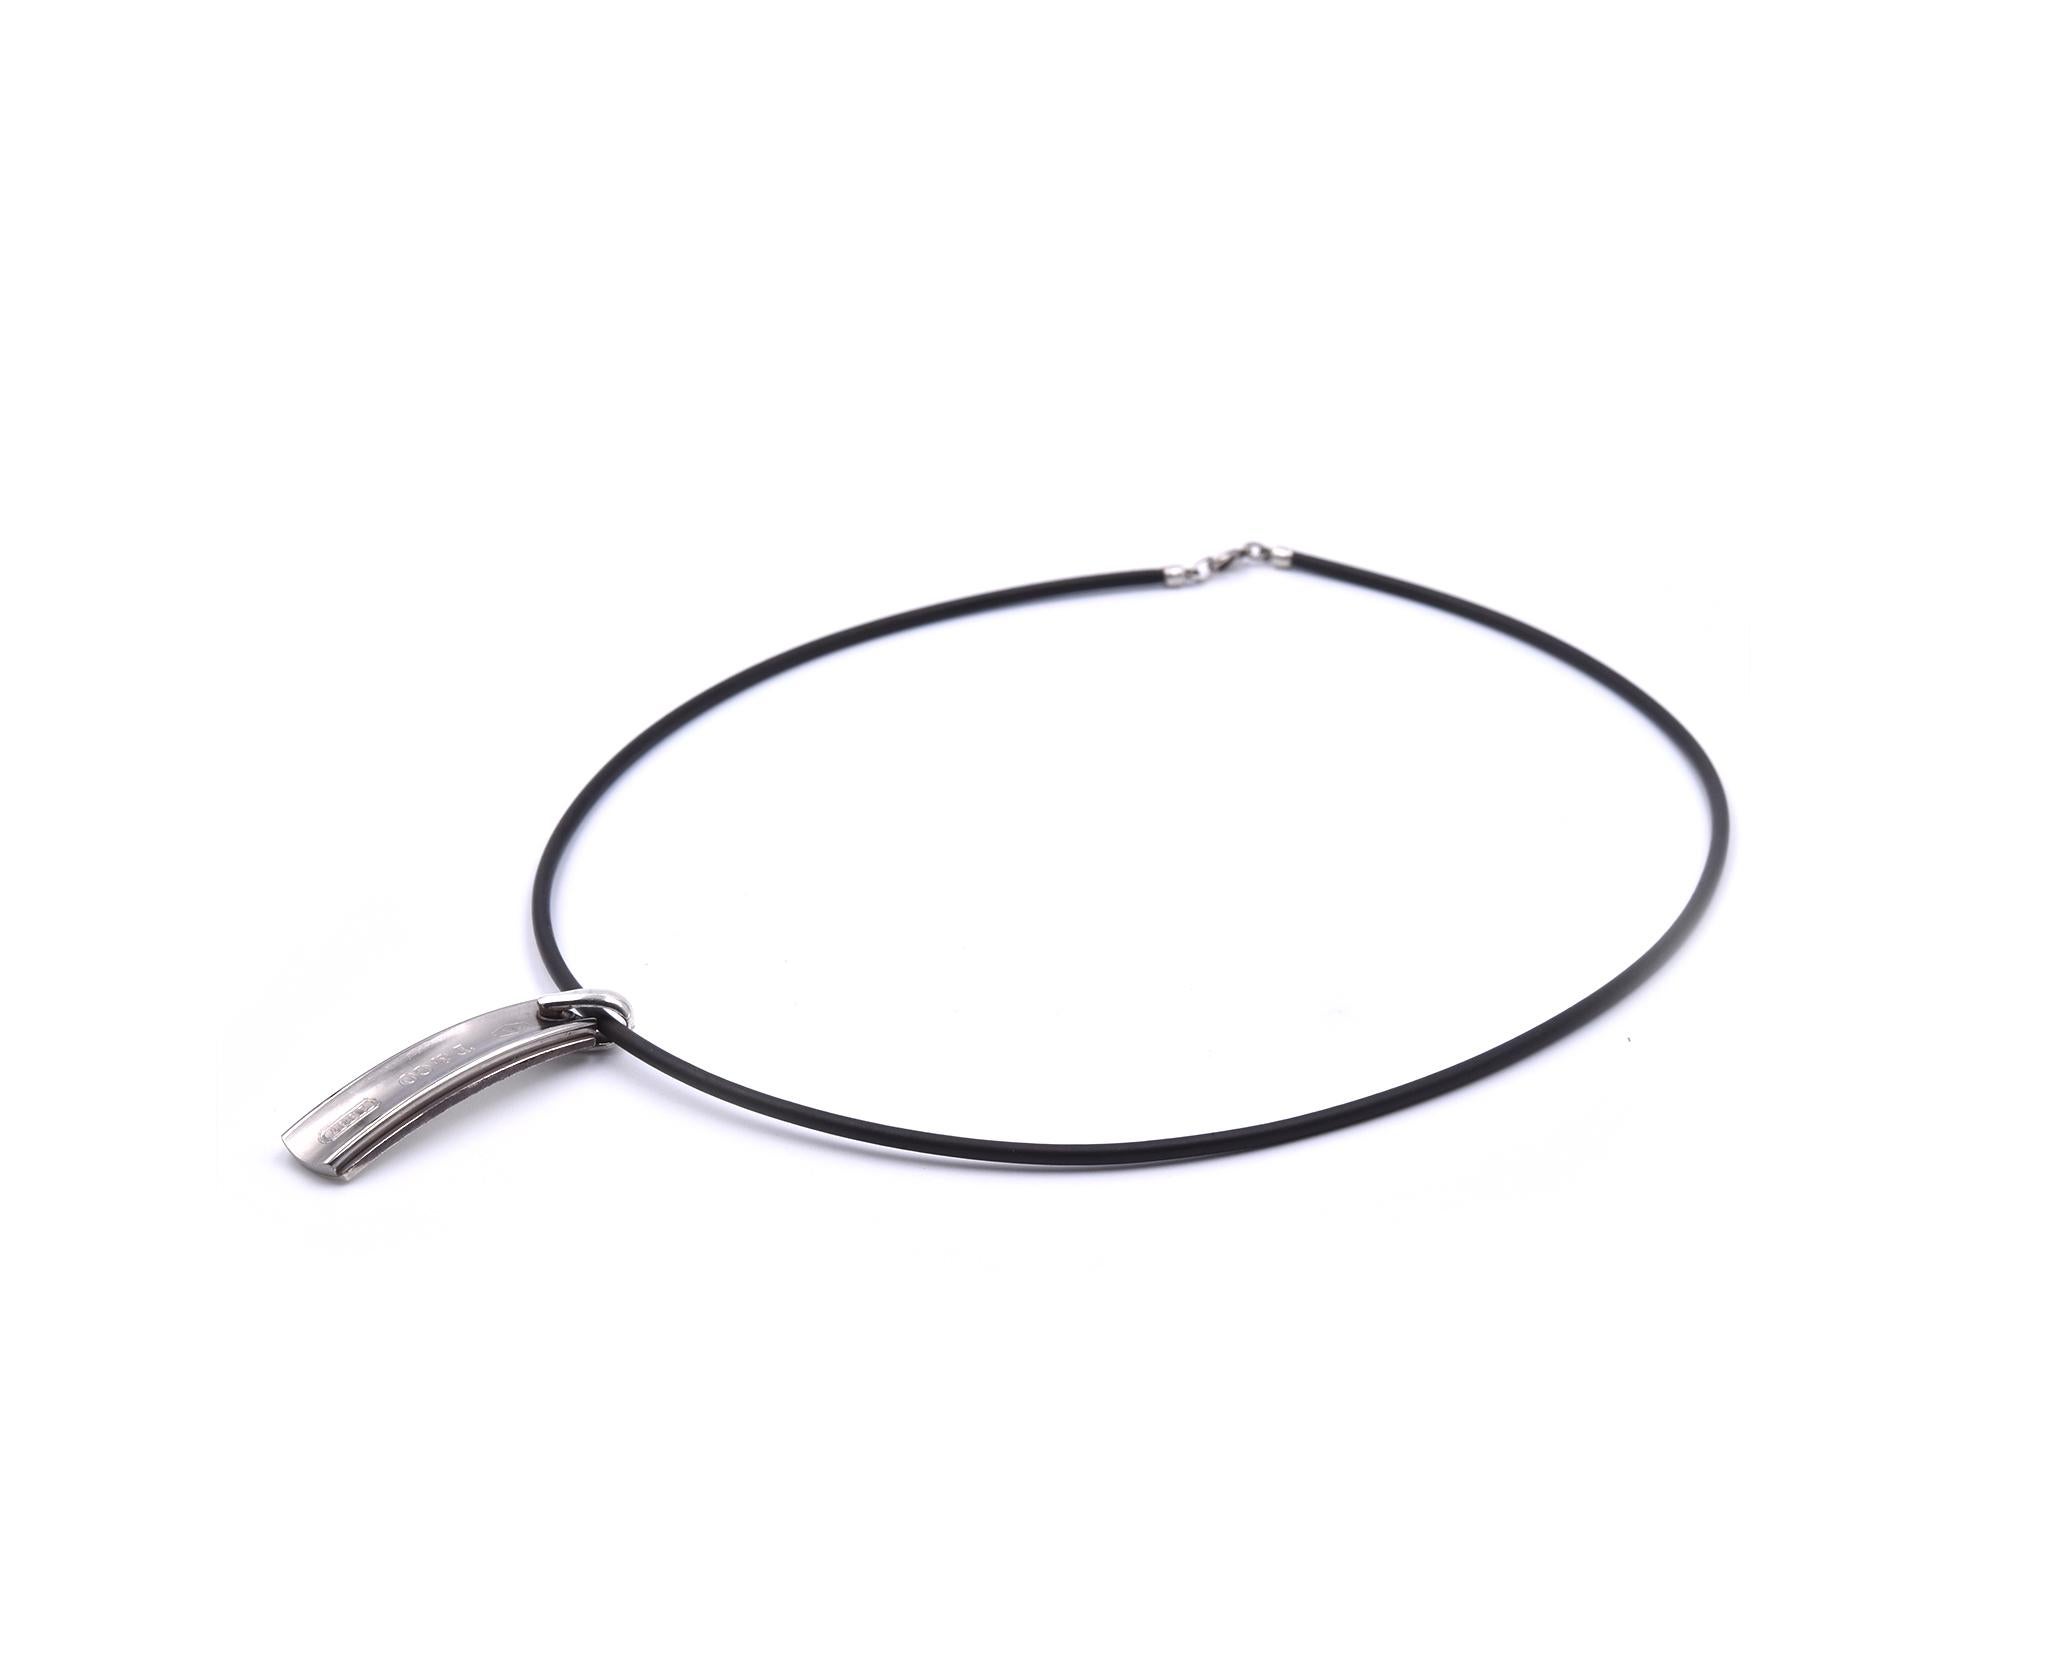 Designer: Tiffany & Co. 
Material: sterling silver and rubber
Dimensions: necklace is 20”-inches long and pendant is 2”-inches long and 12mm wide
Weight:  15.35 grams
